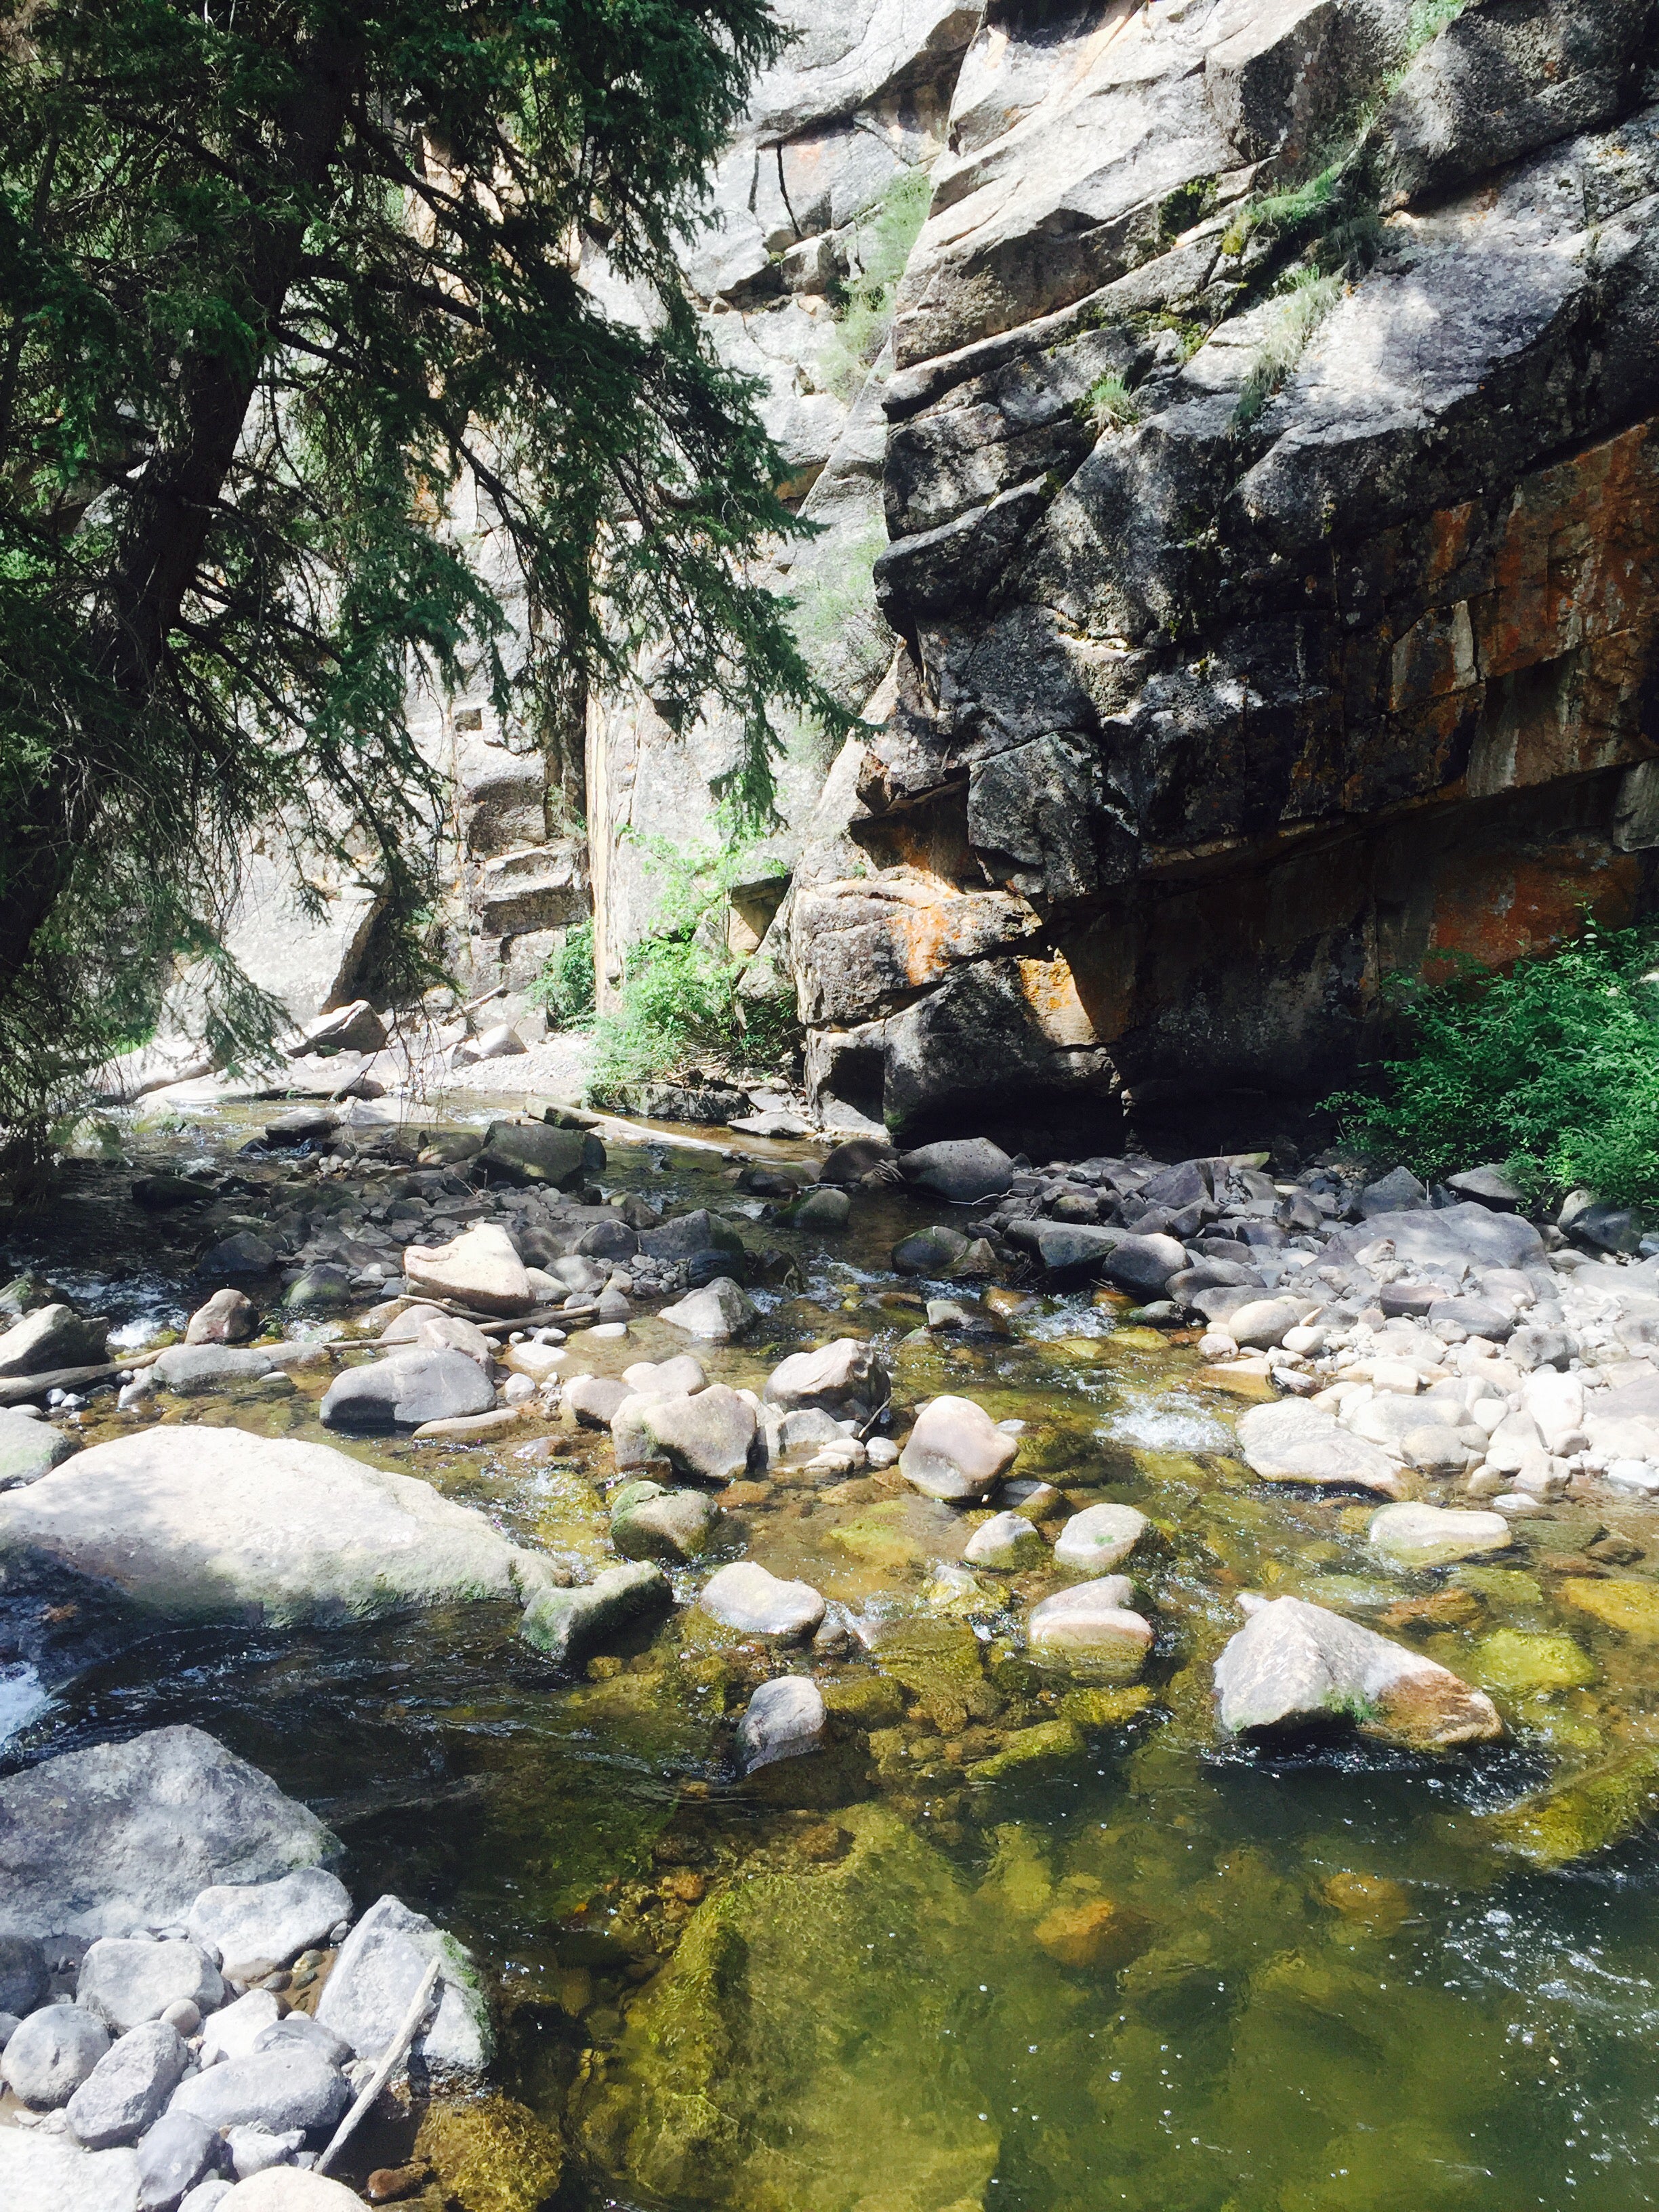 Camper submitted image from Curecanti Creek - Curecanti National Recreation Area - 2